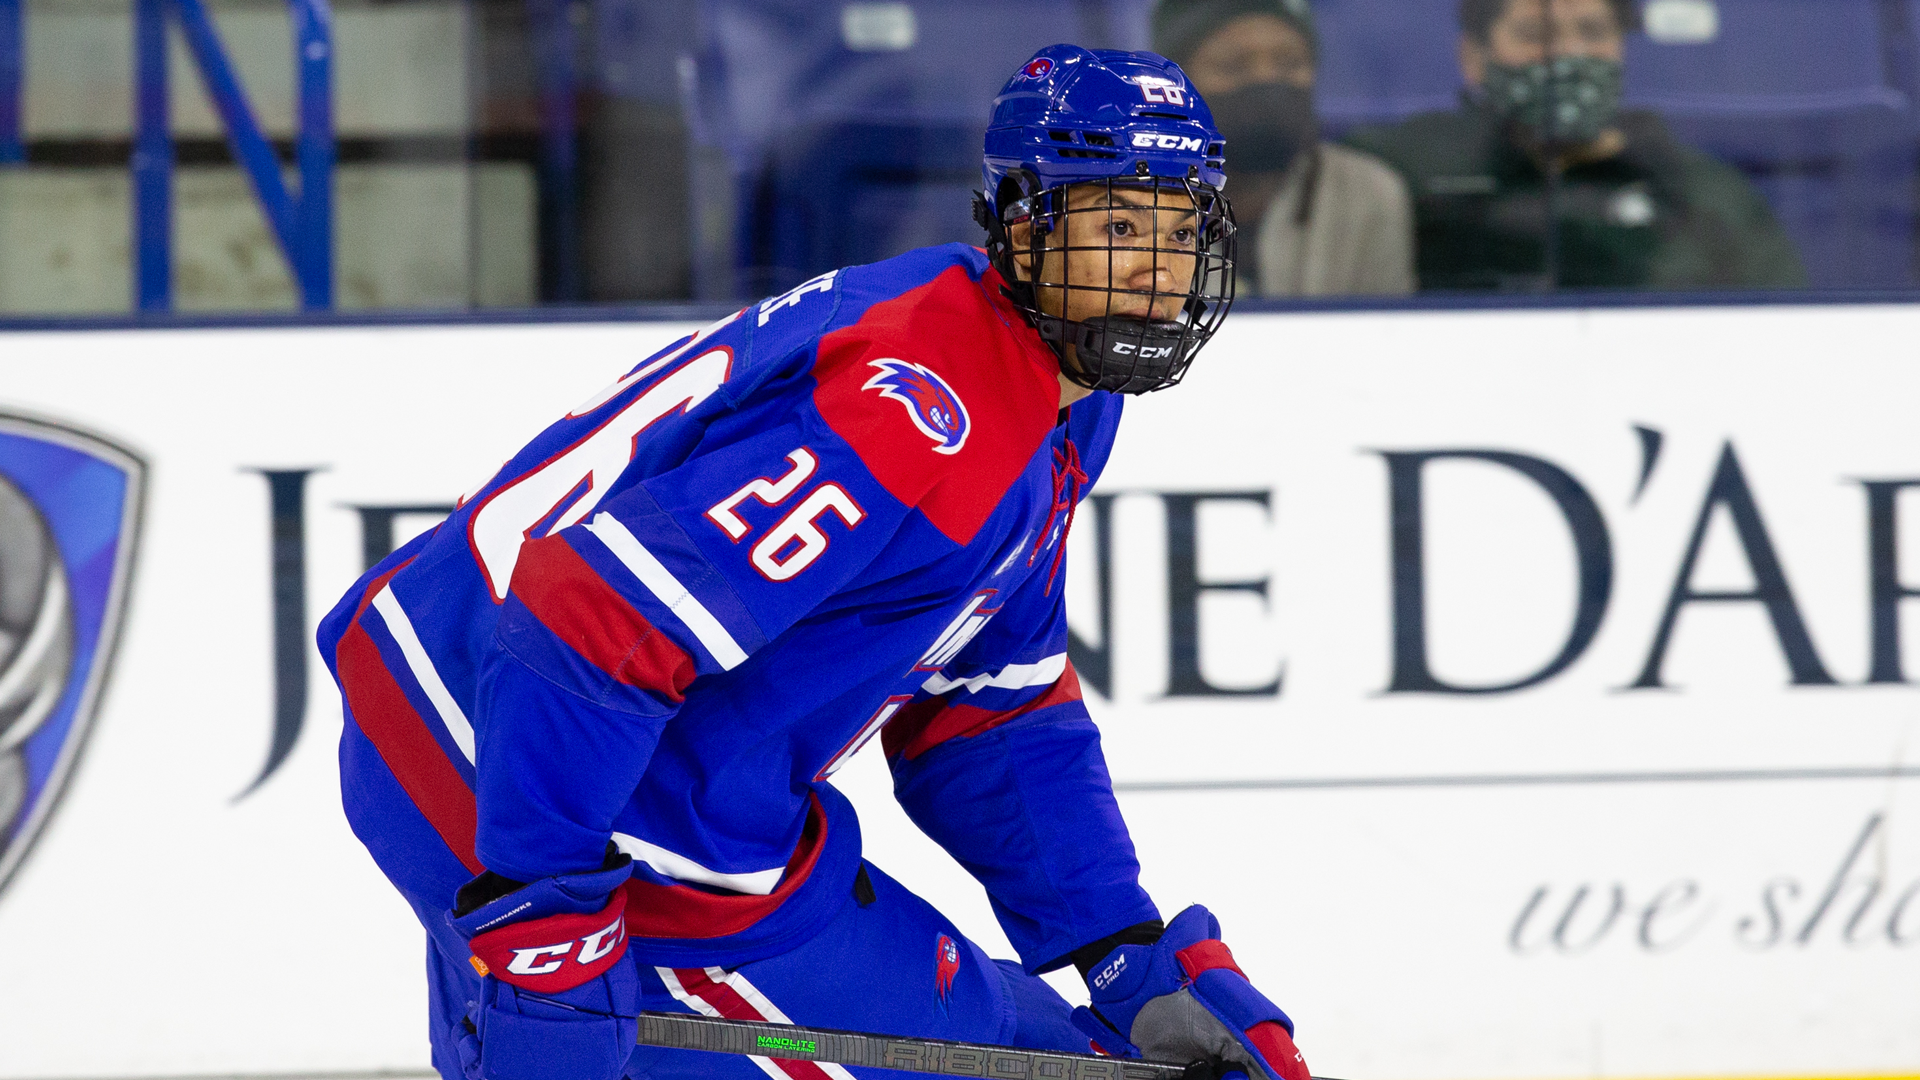 Five River Hawks Sign Pro Contracts - UMass Lowell Athletics